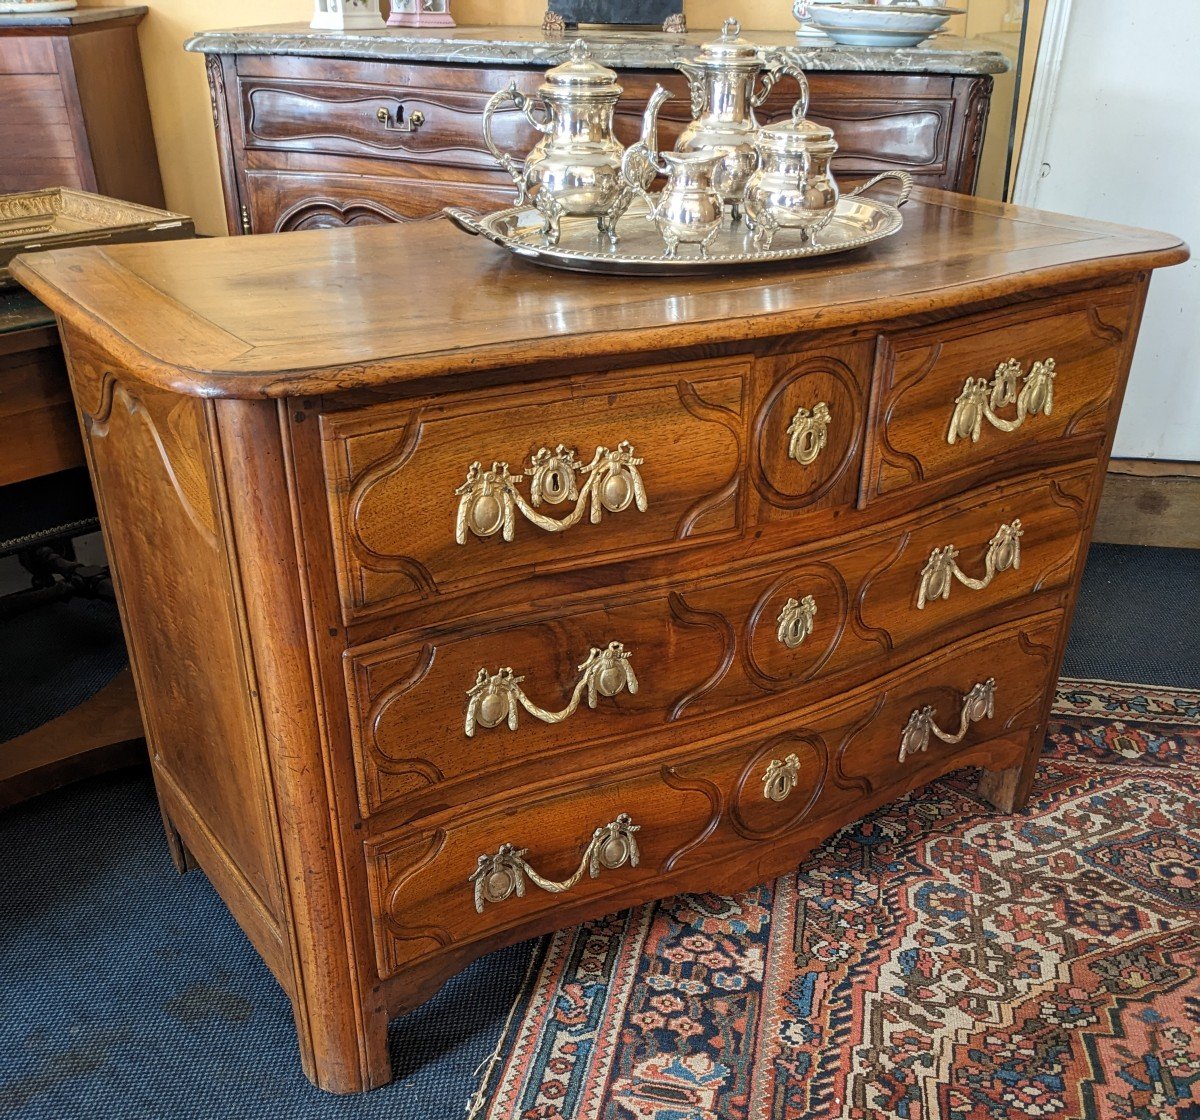 Louis XV Period Chest Of Drawers In Walnut With A So-called "parisian" Curved Front.-photo-1